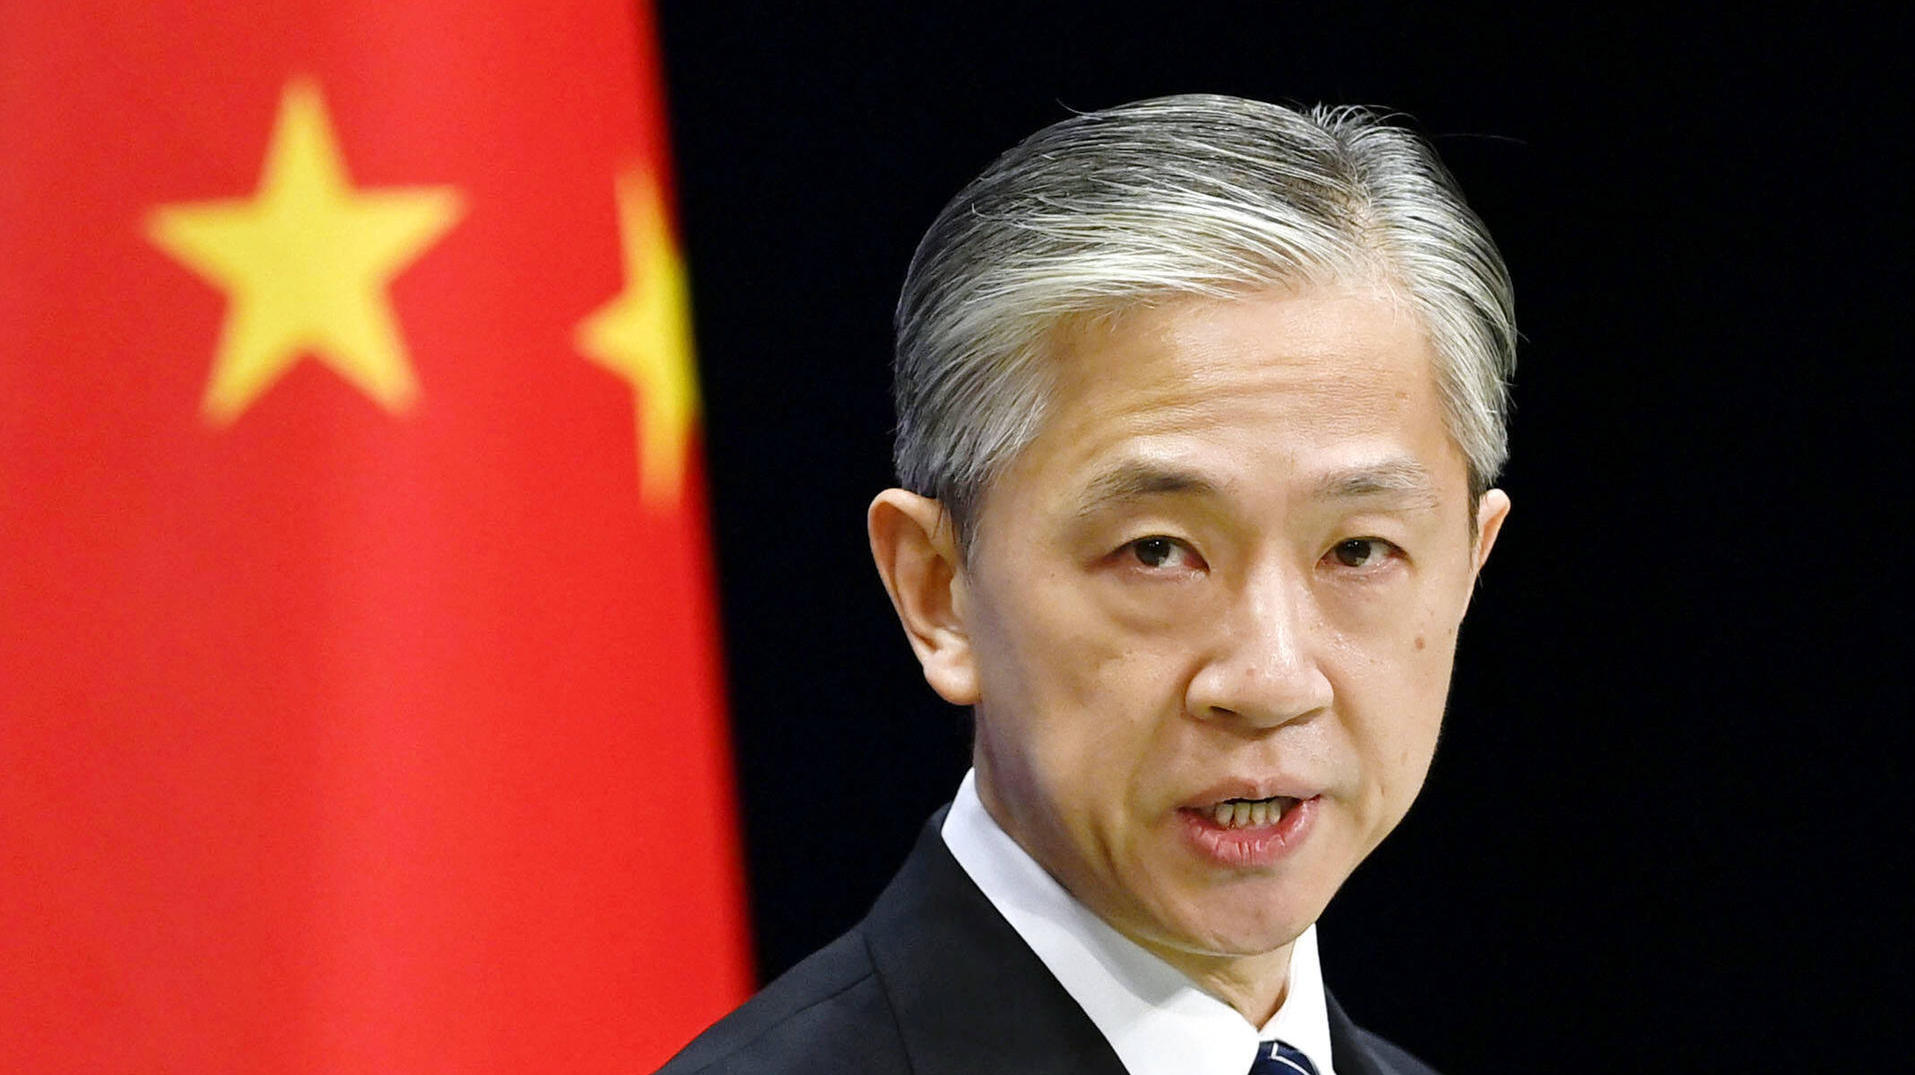 China threatens countries after boycotting the Olympics: "They will pay for it"